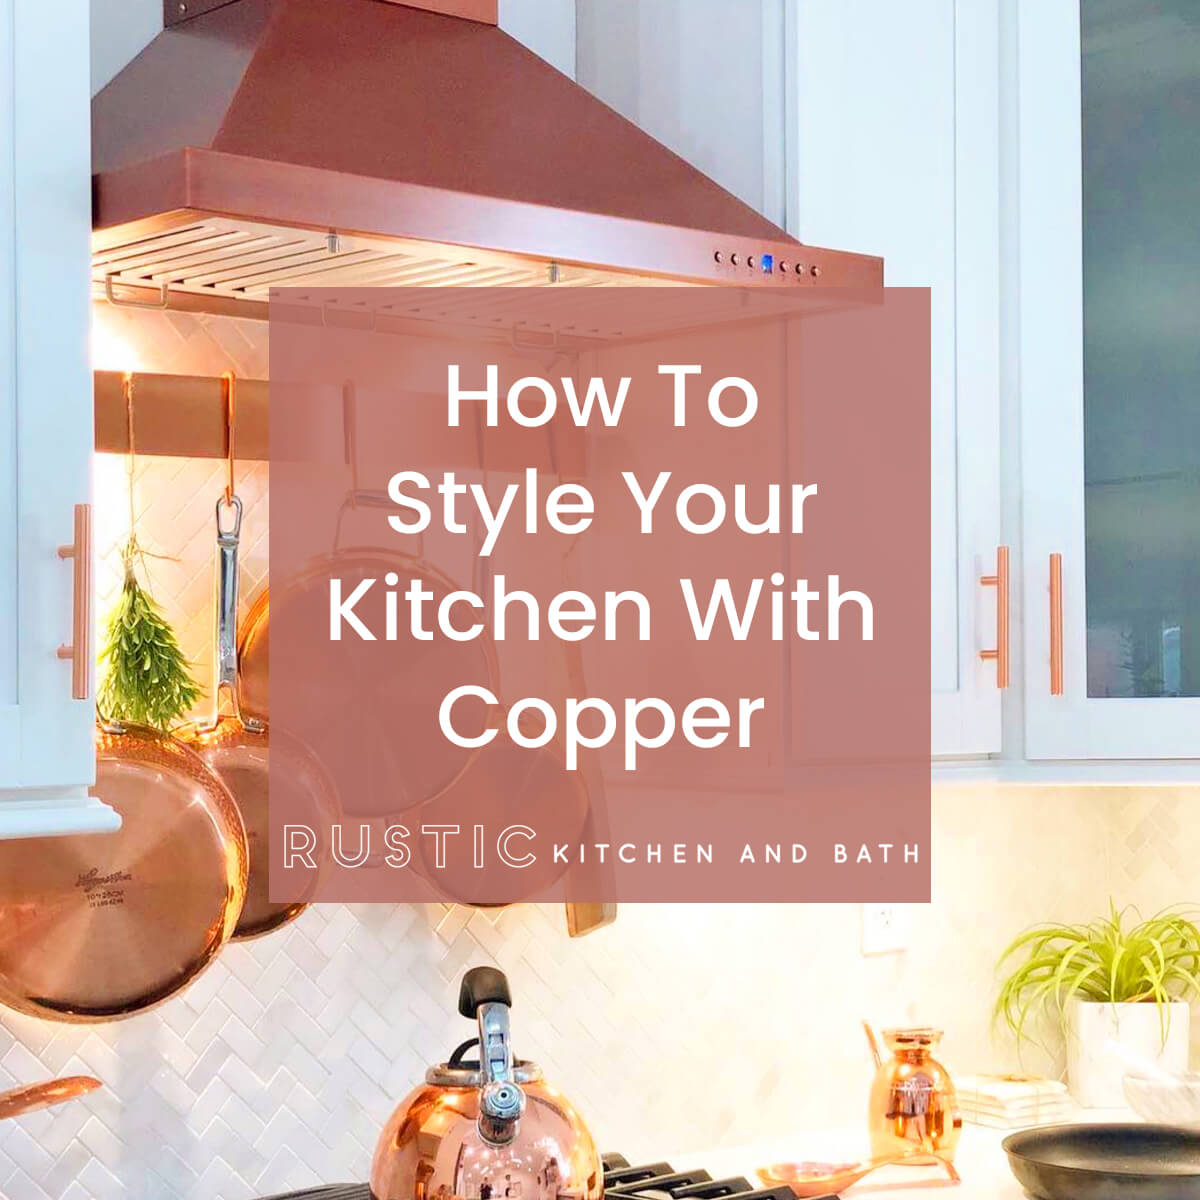 How To Style Your Kitchen With Copper